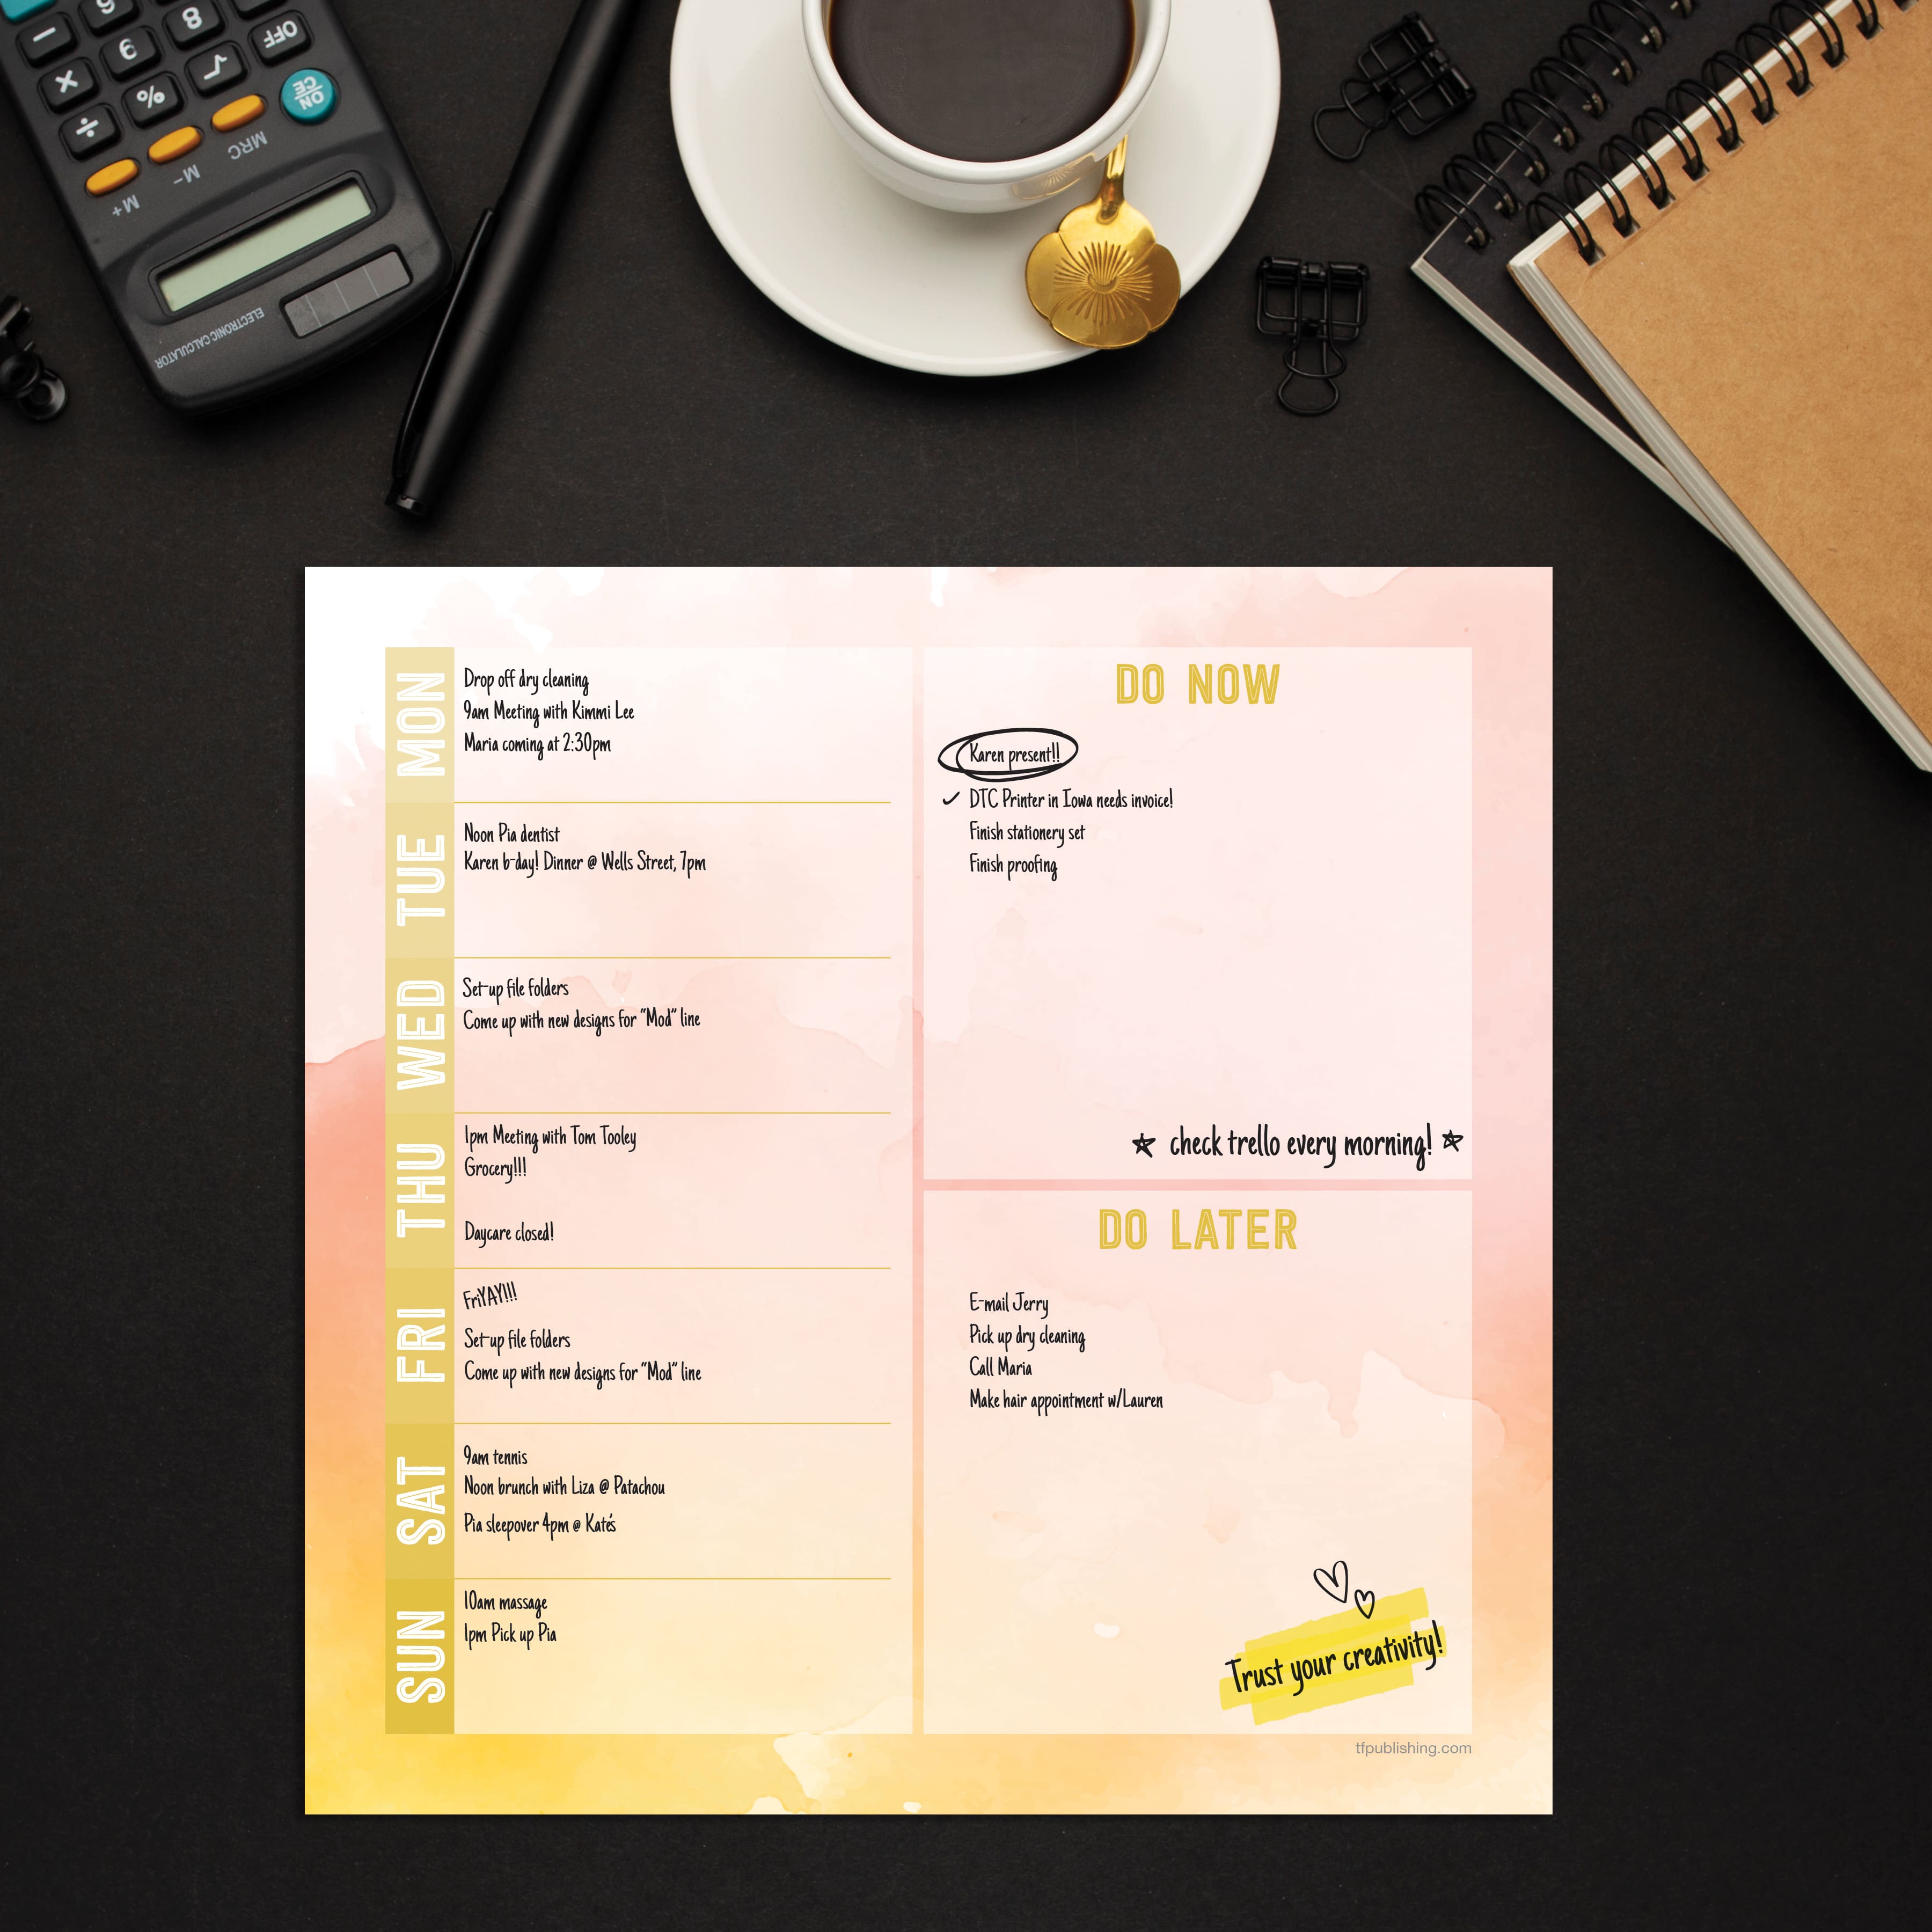 TF Publishing Joy Weekly Square Schedule Pad